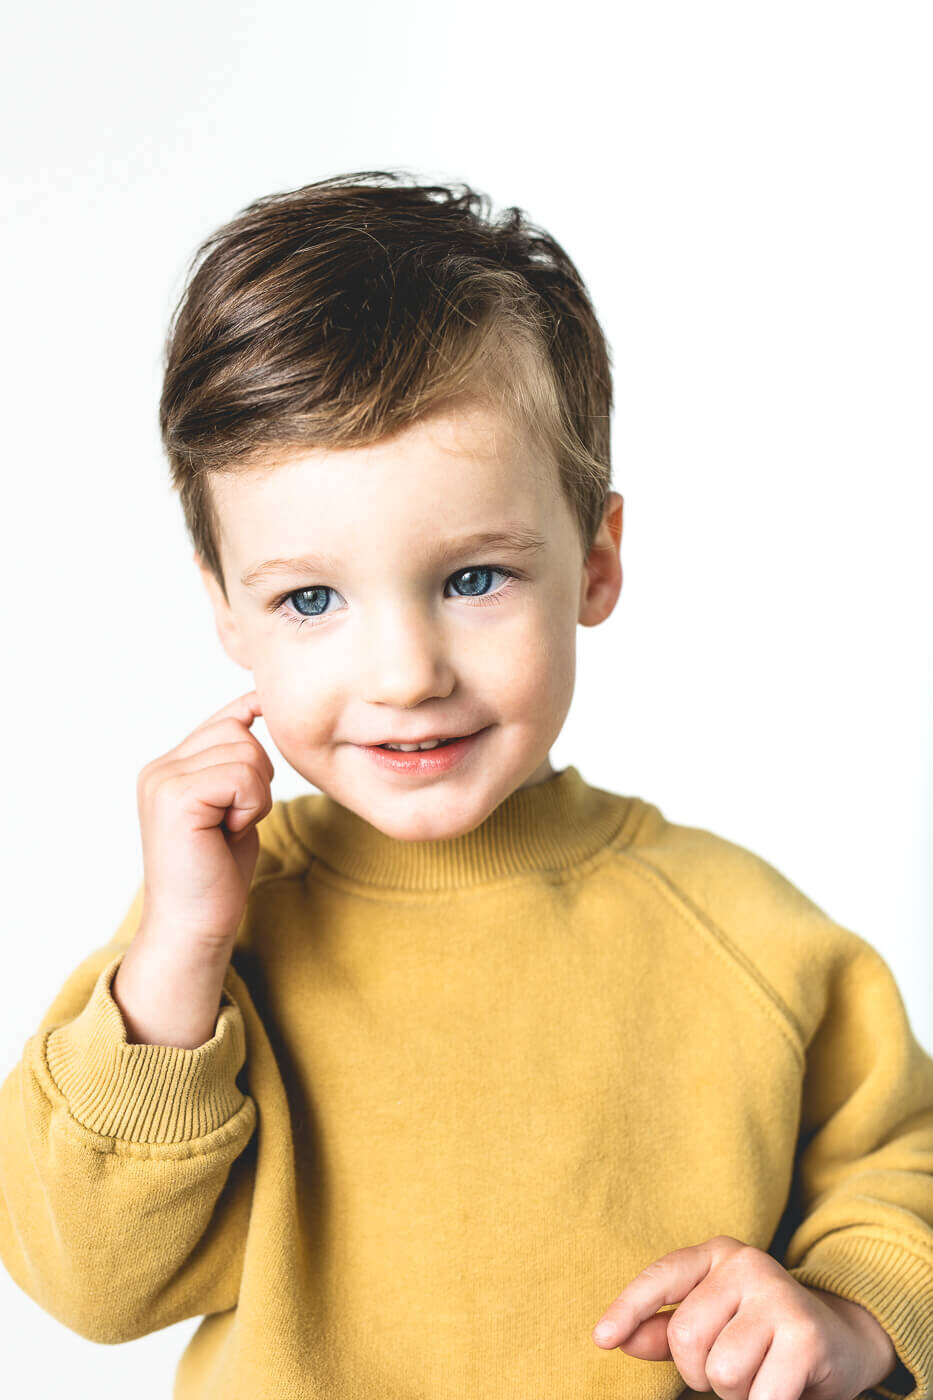 Child in yellow sweater smiling shyly